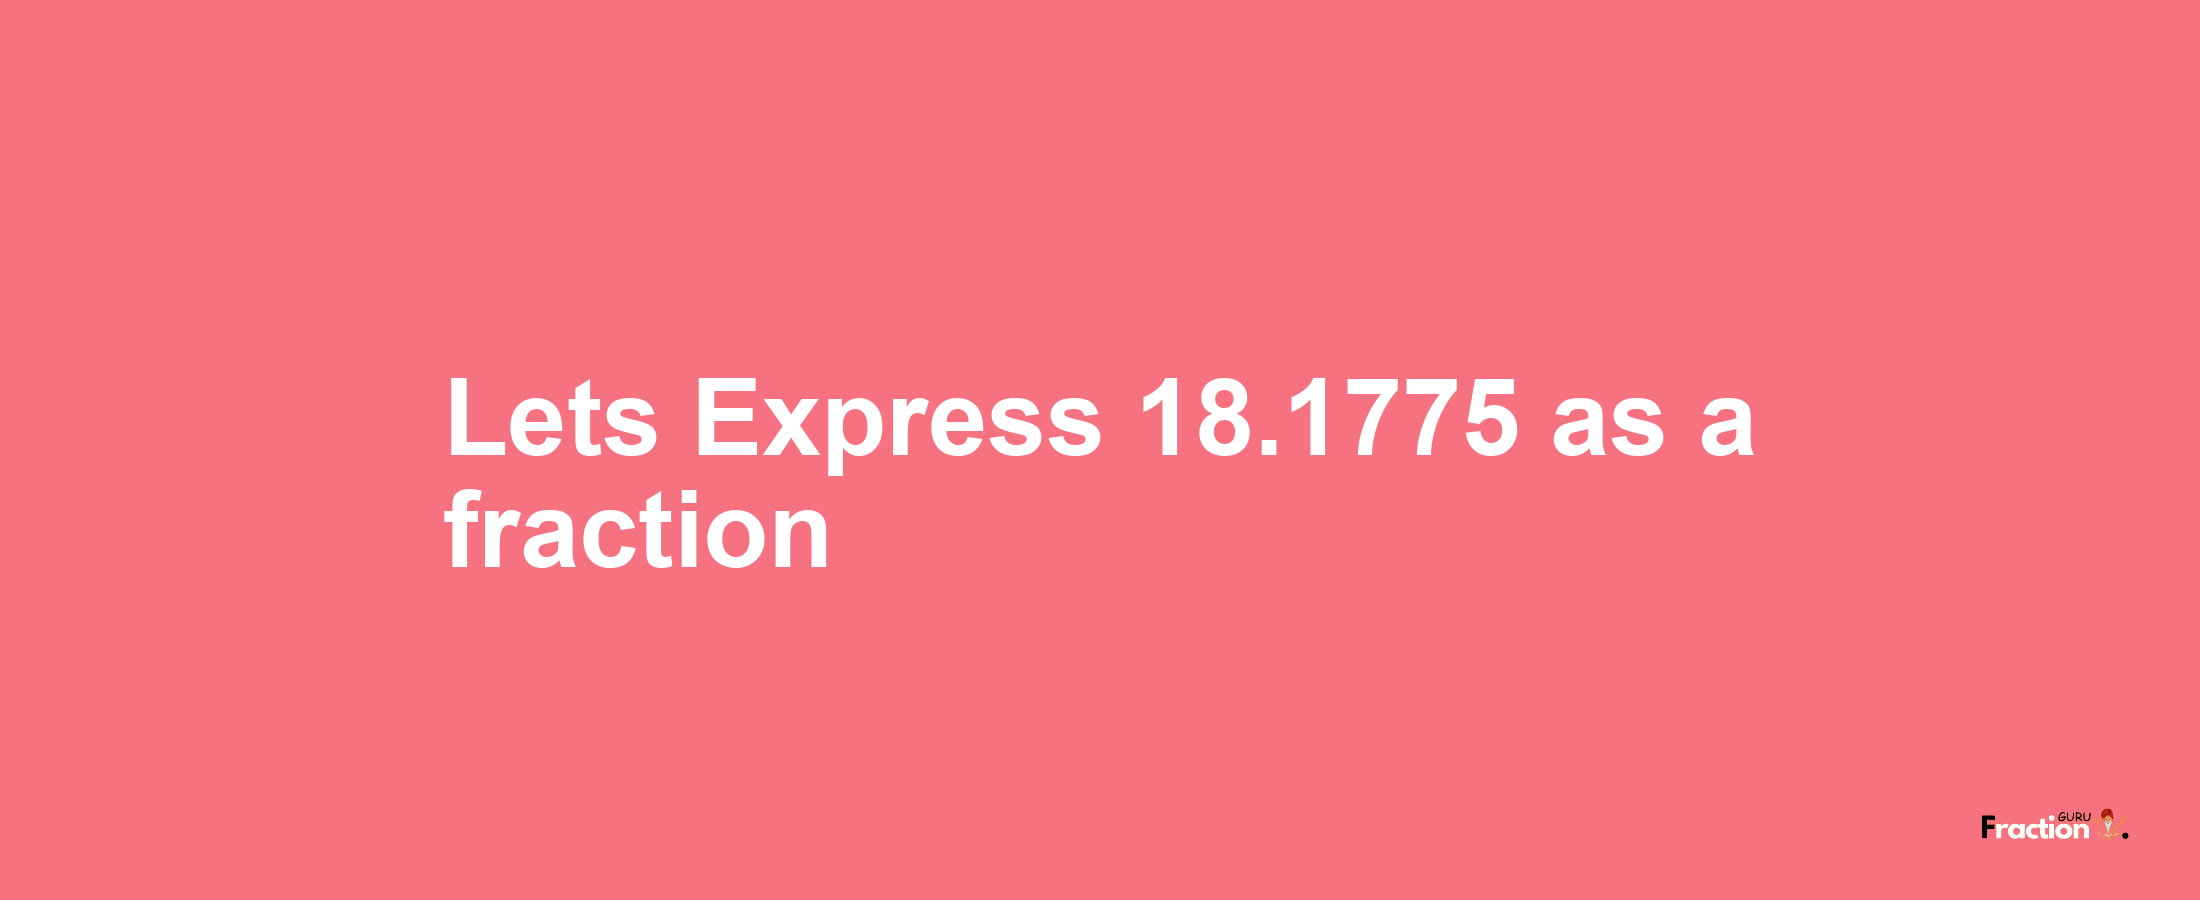 Lets Express 18.1775 as afraction